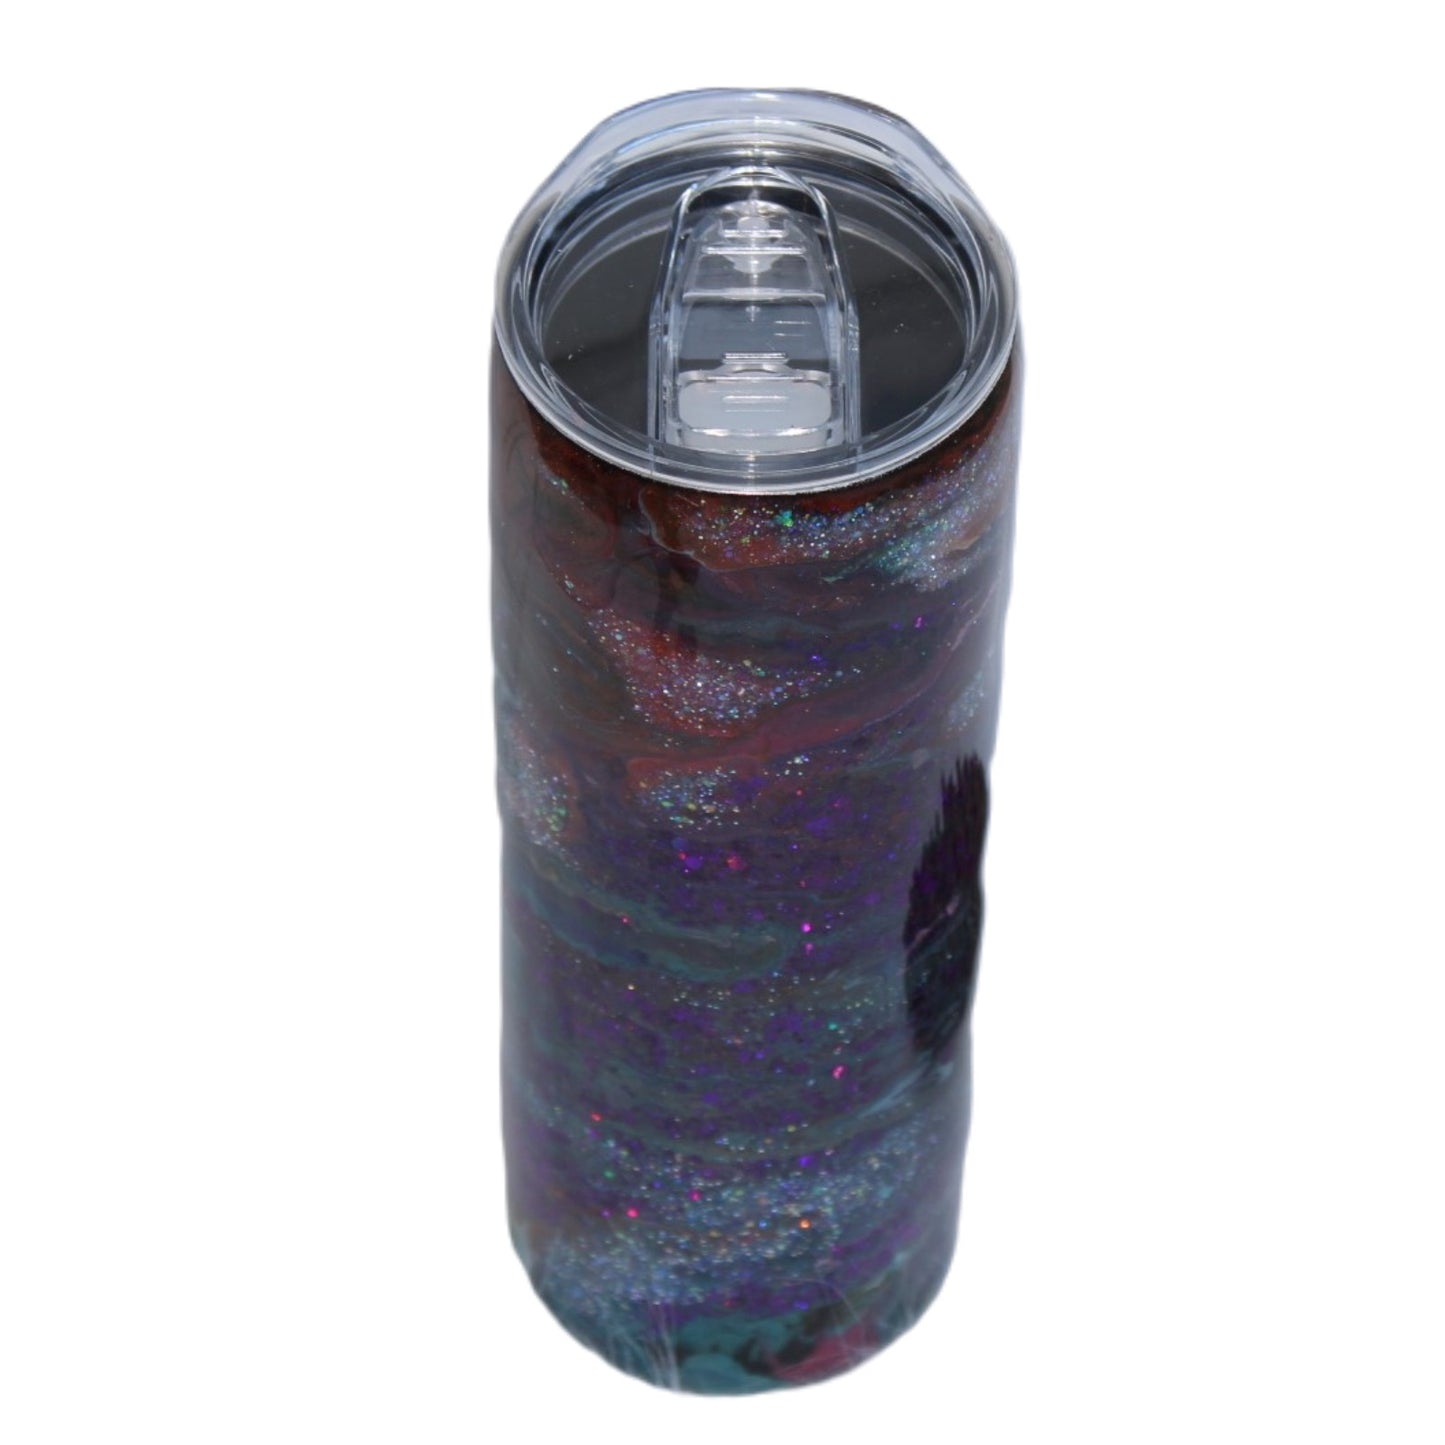 Tumbler Straight Skinny 20 ounce we named (Oil and Water)